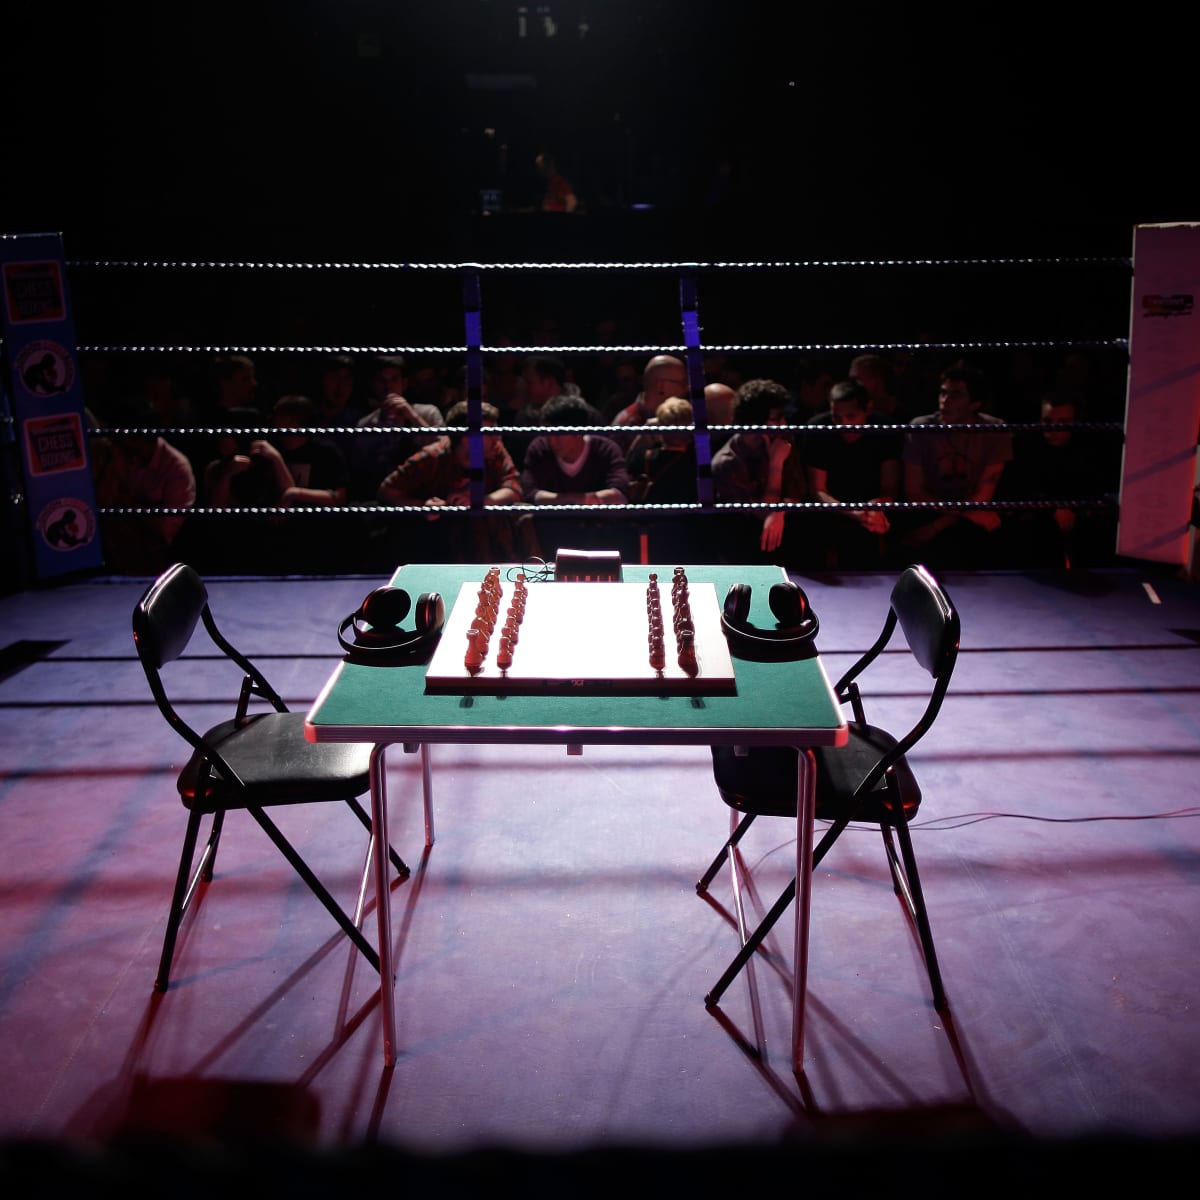 Photo Gallery – Chess Boxing Organisation of India